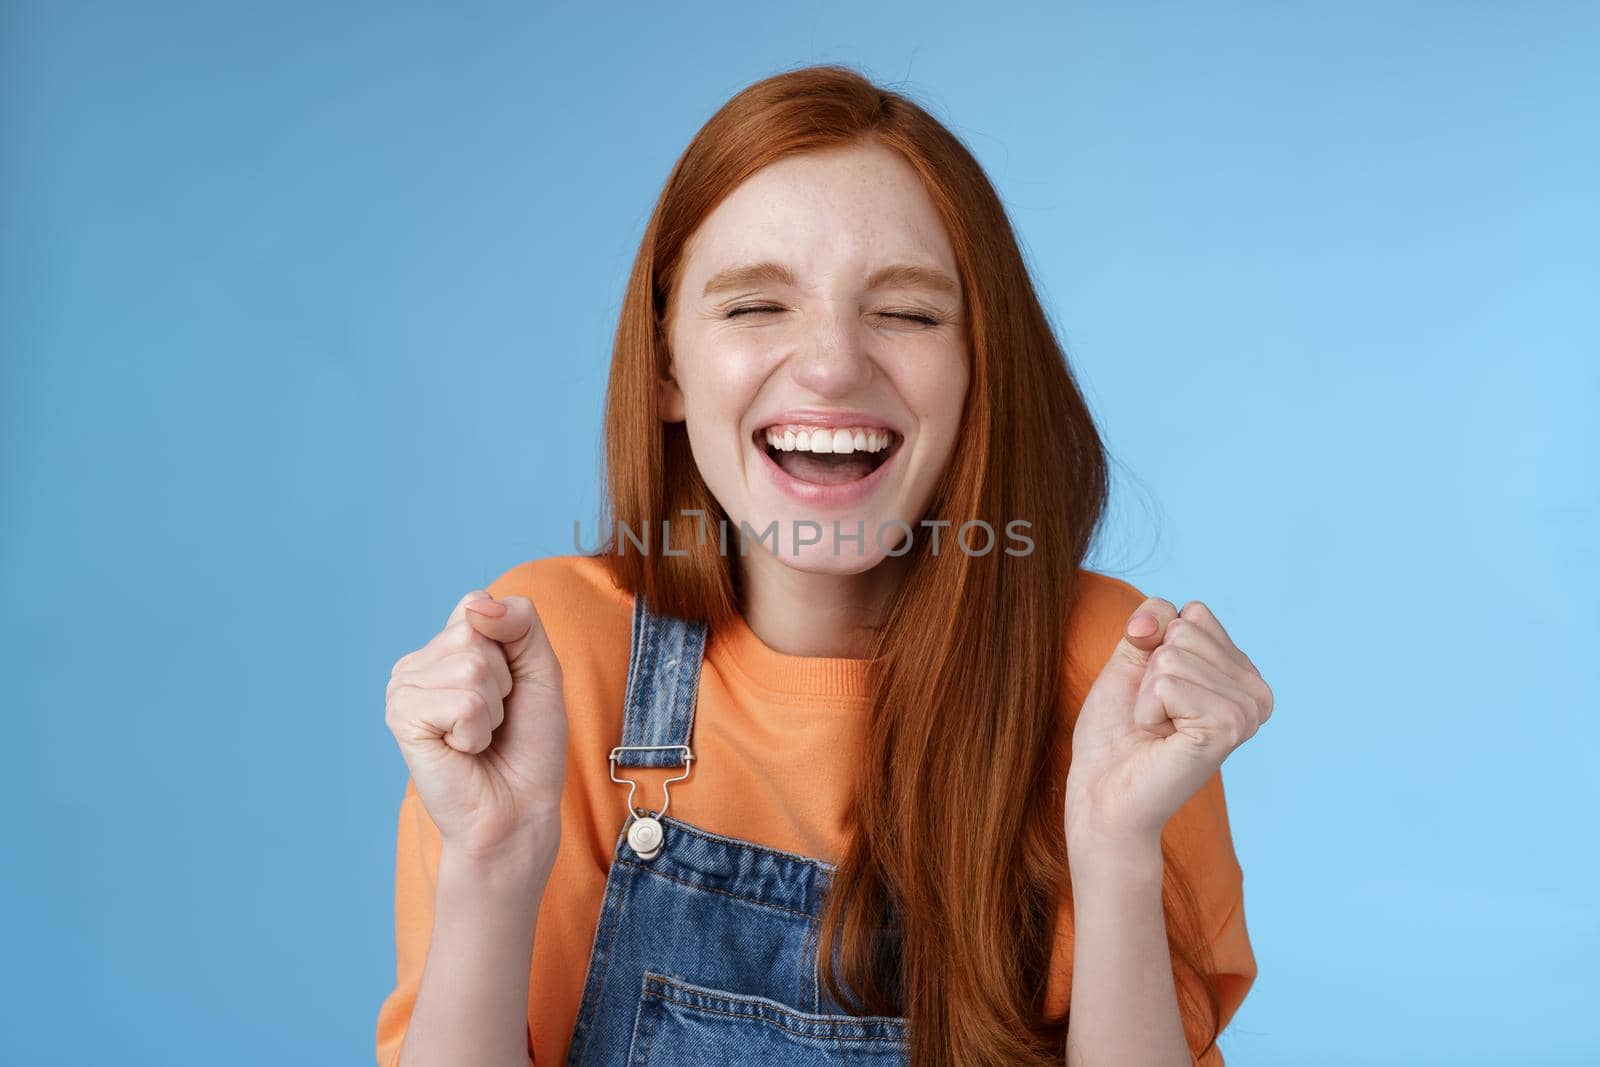 Lifestyle. Sincere happy rejocing ginger girl close eyes smiling broadly say yes waving clenched fists joyfully celebrate enterting university dream come true winning prize triumphing cheerfully blue background.